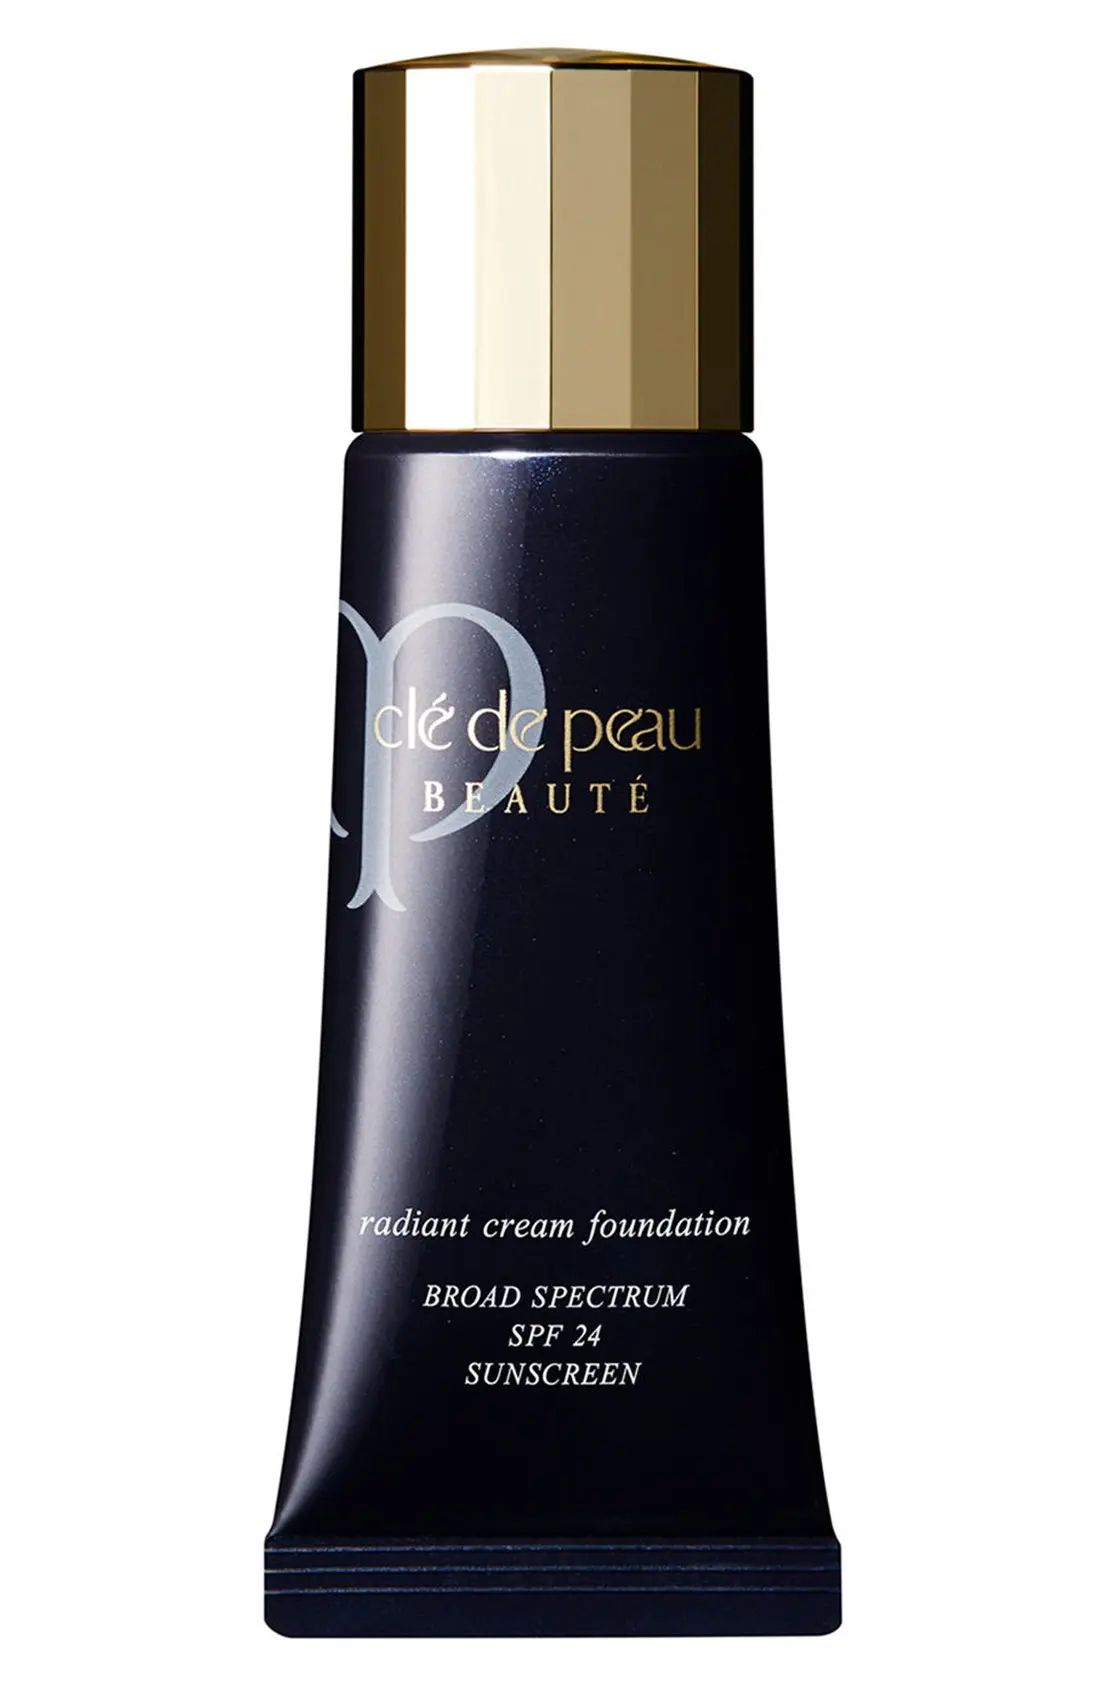 Cle de Peau Beaute Radiant Cream Foundation SPF 24 in O10 - Very Light Ochre at Nordstrom | Nordstrom